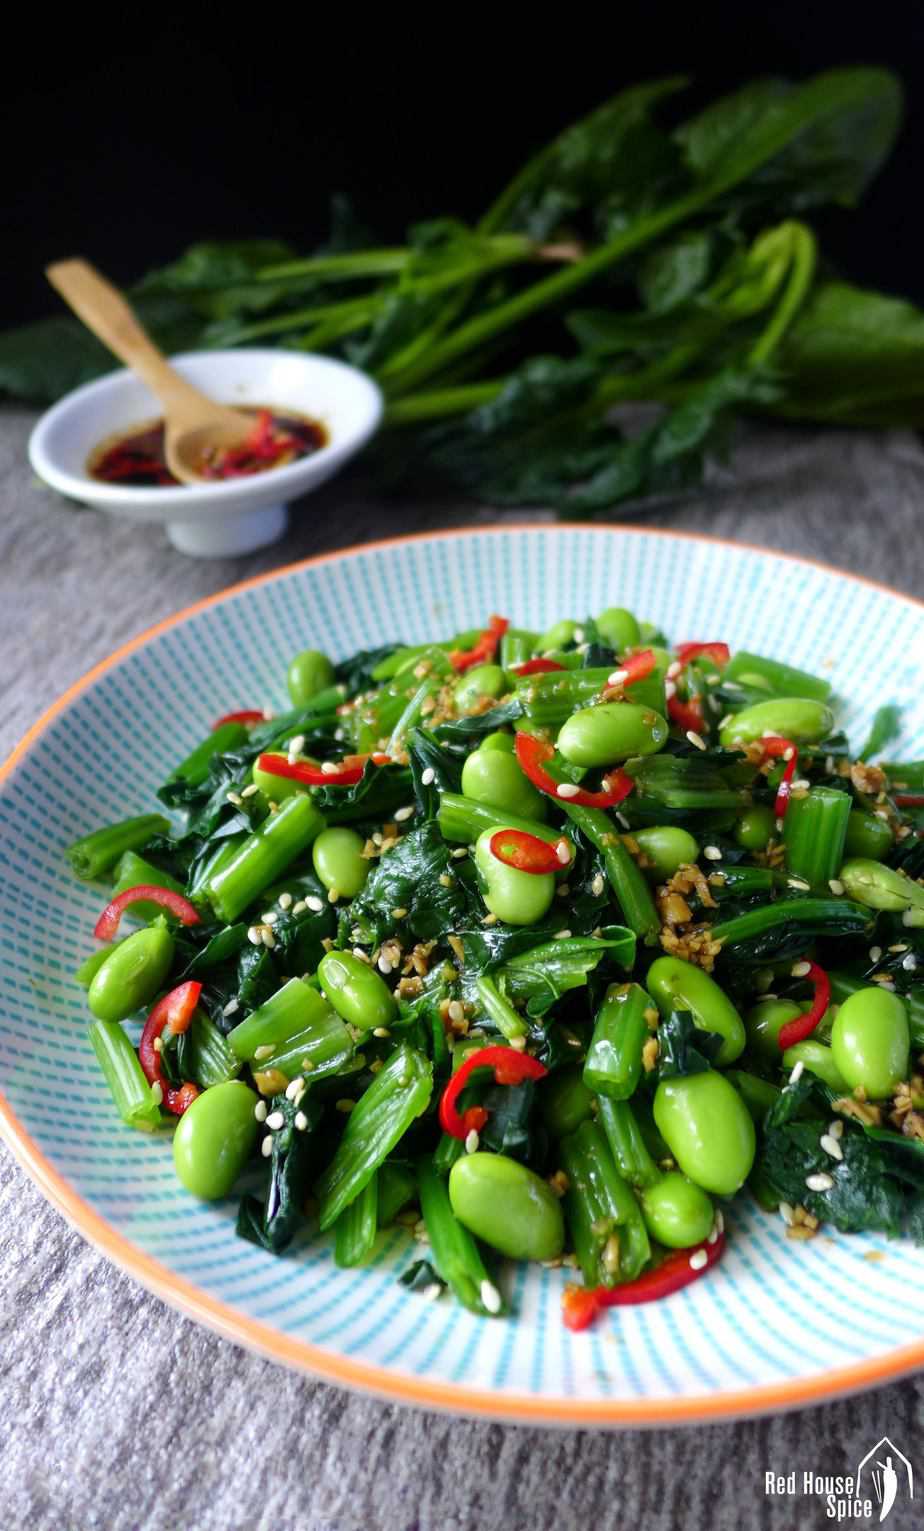 An earthy, refreshing dish loaded with nutrients, spinach and soybean salad is seasoned with a simple yet flavourful Chinese ginger dressing.